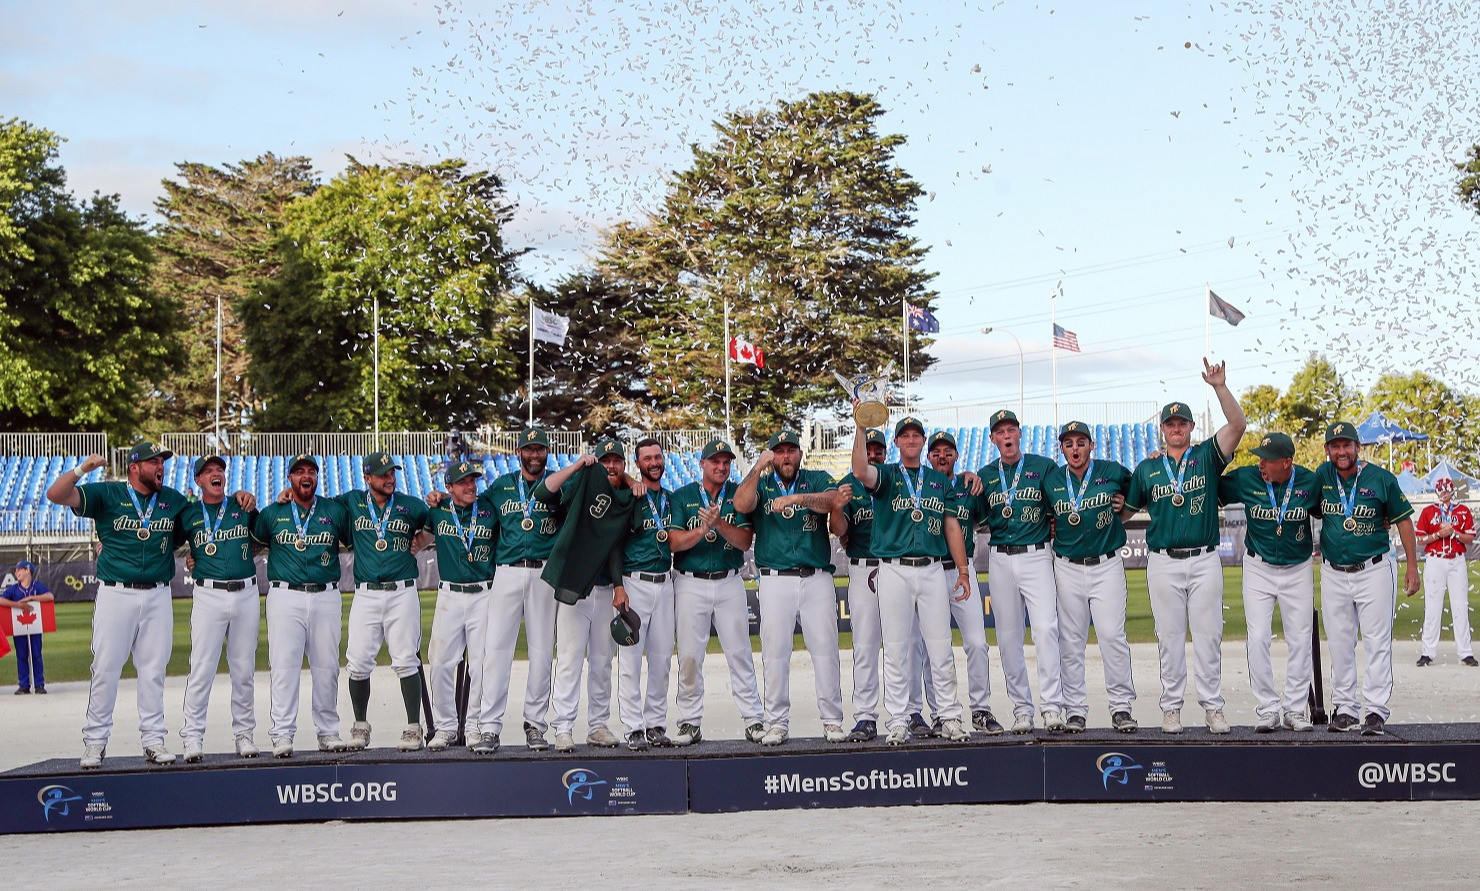 Australia are the current holders of the WBSC Men's Softball World Cup, but have yet to secure their place at the next edition ©WBSC